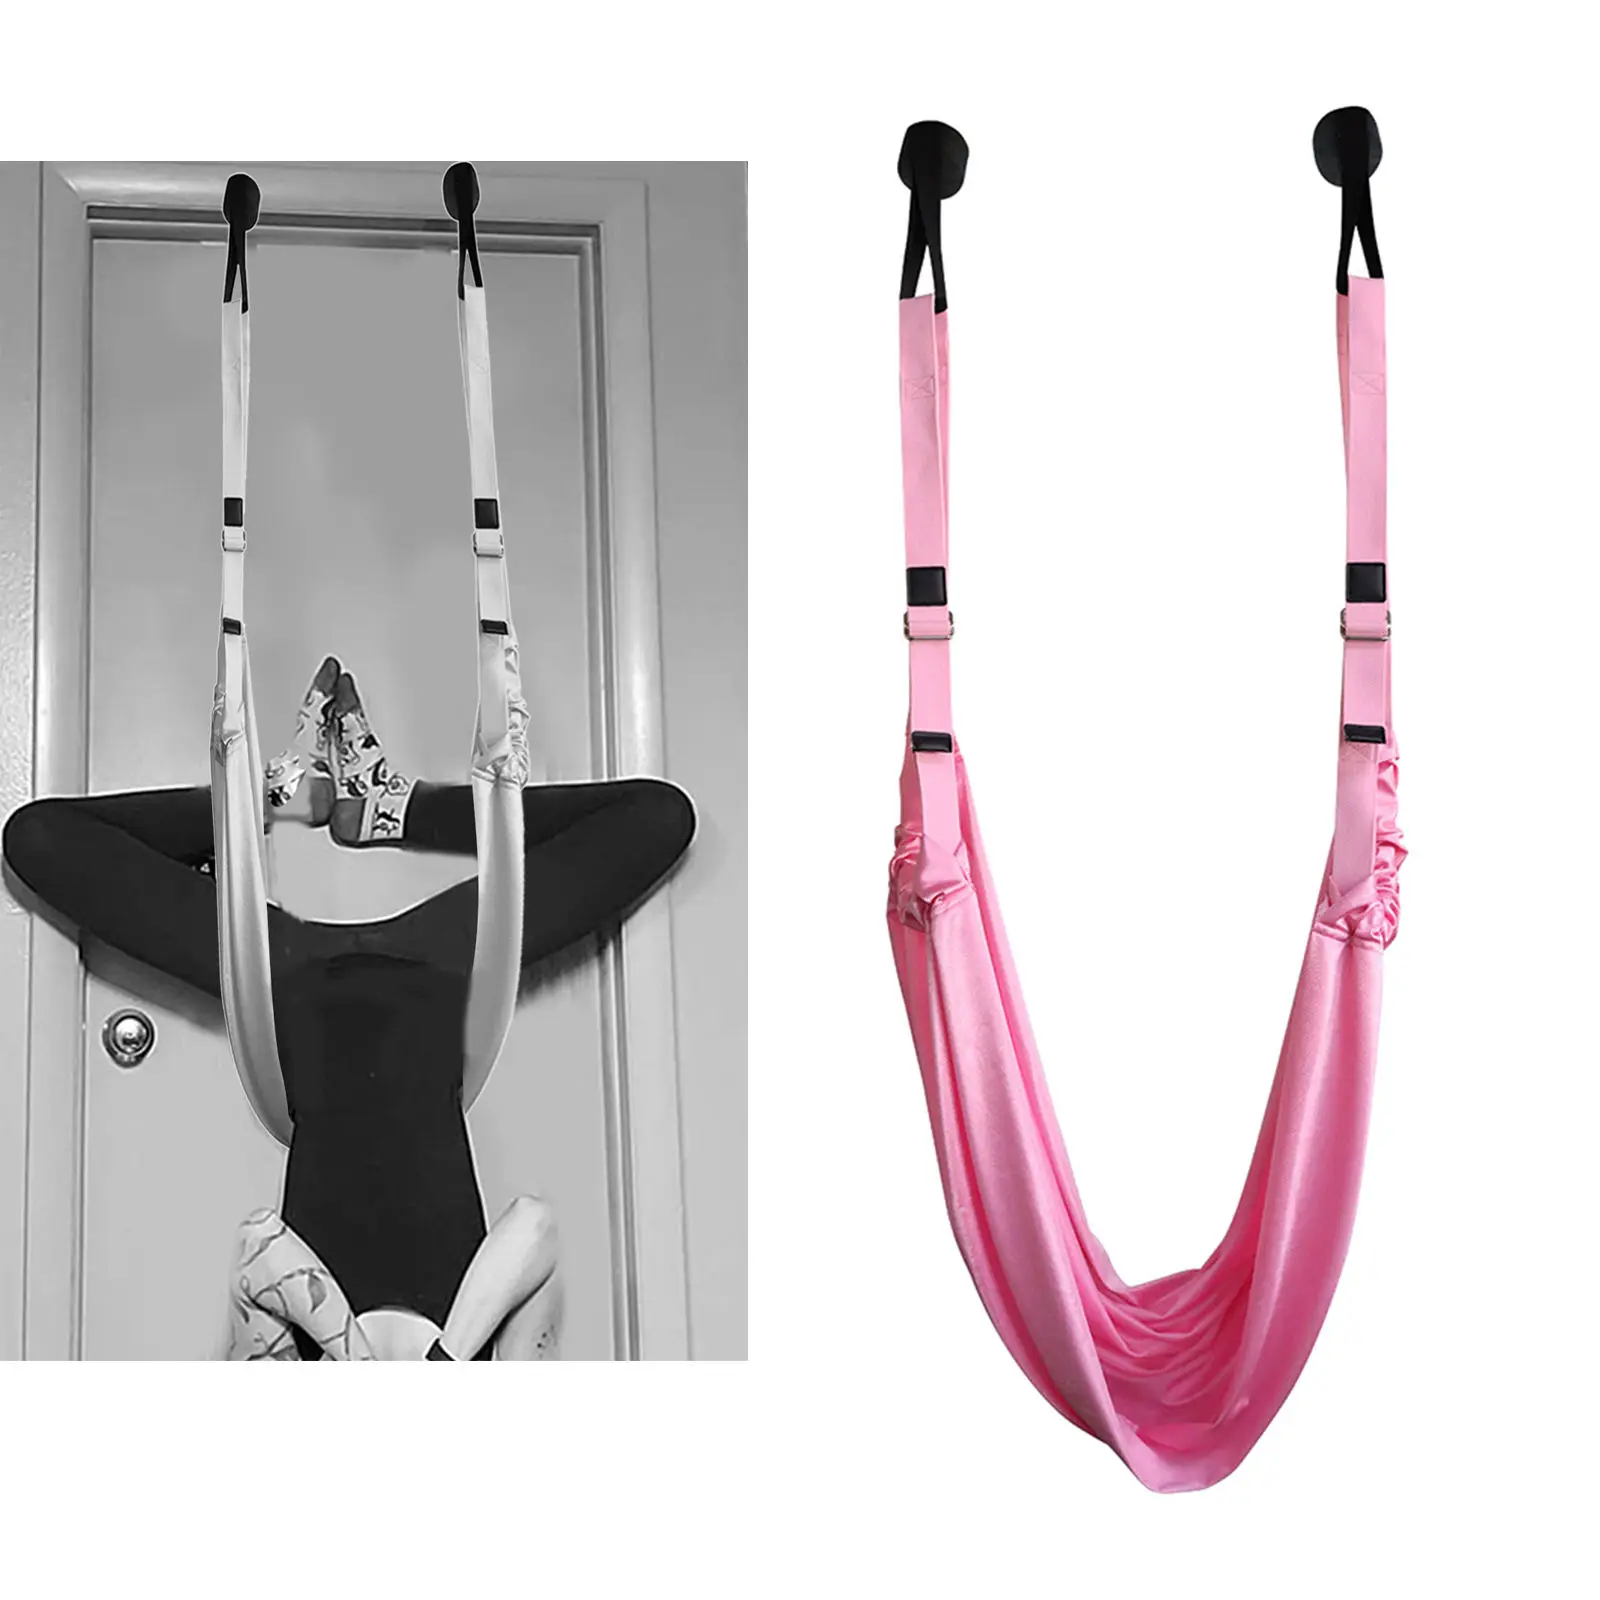 Aerial Yoga Flying Yoga Swing Yoga Hammock Trapeze Sling Inversion Tool for Gym Home Fitness